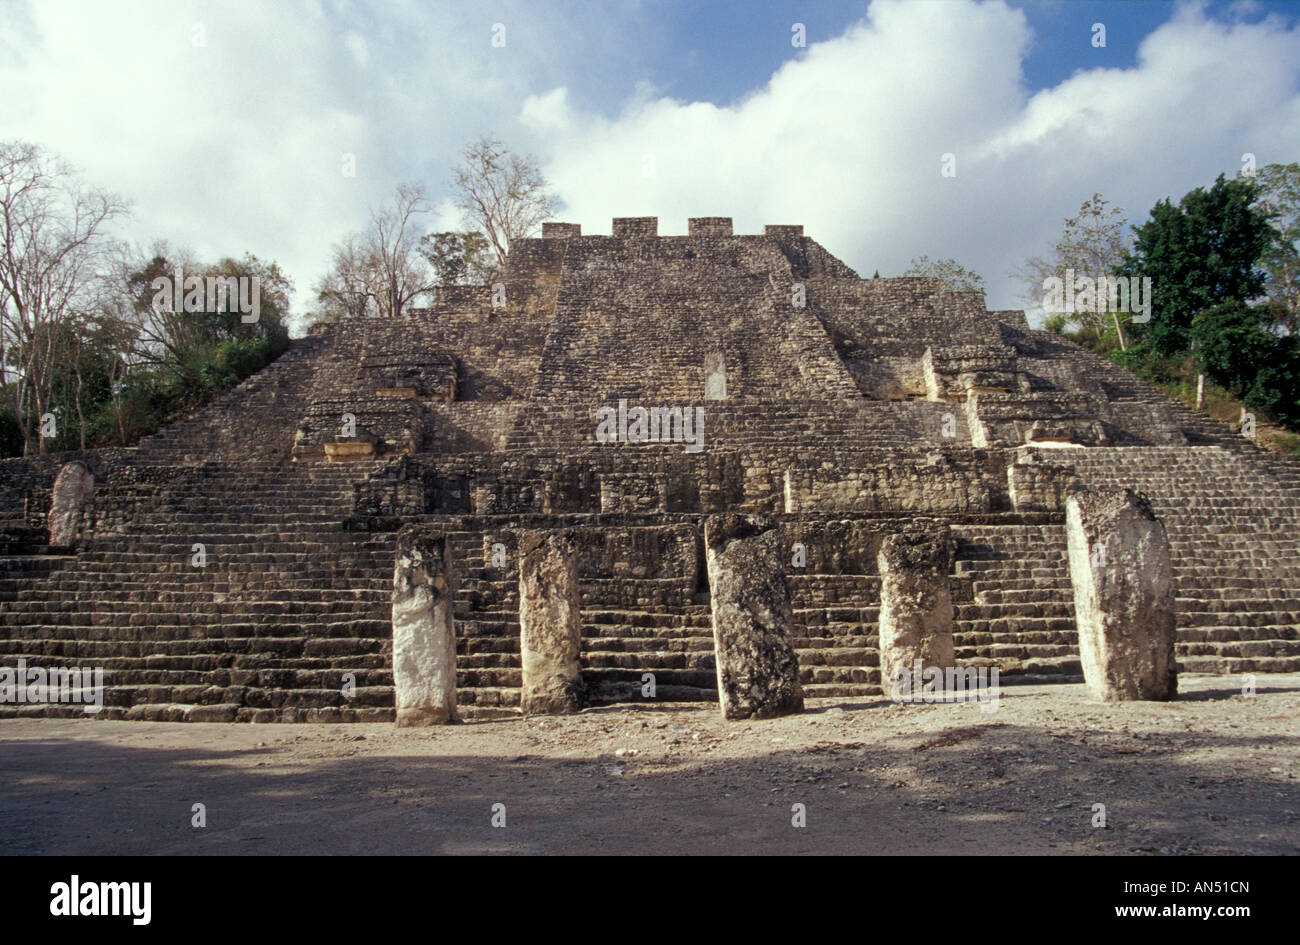 Structure II the Great Pyramid at the Mayan ruins of Calakmul, Campeche, Mexico Stock Photo